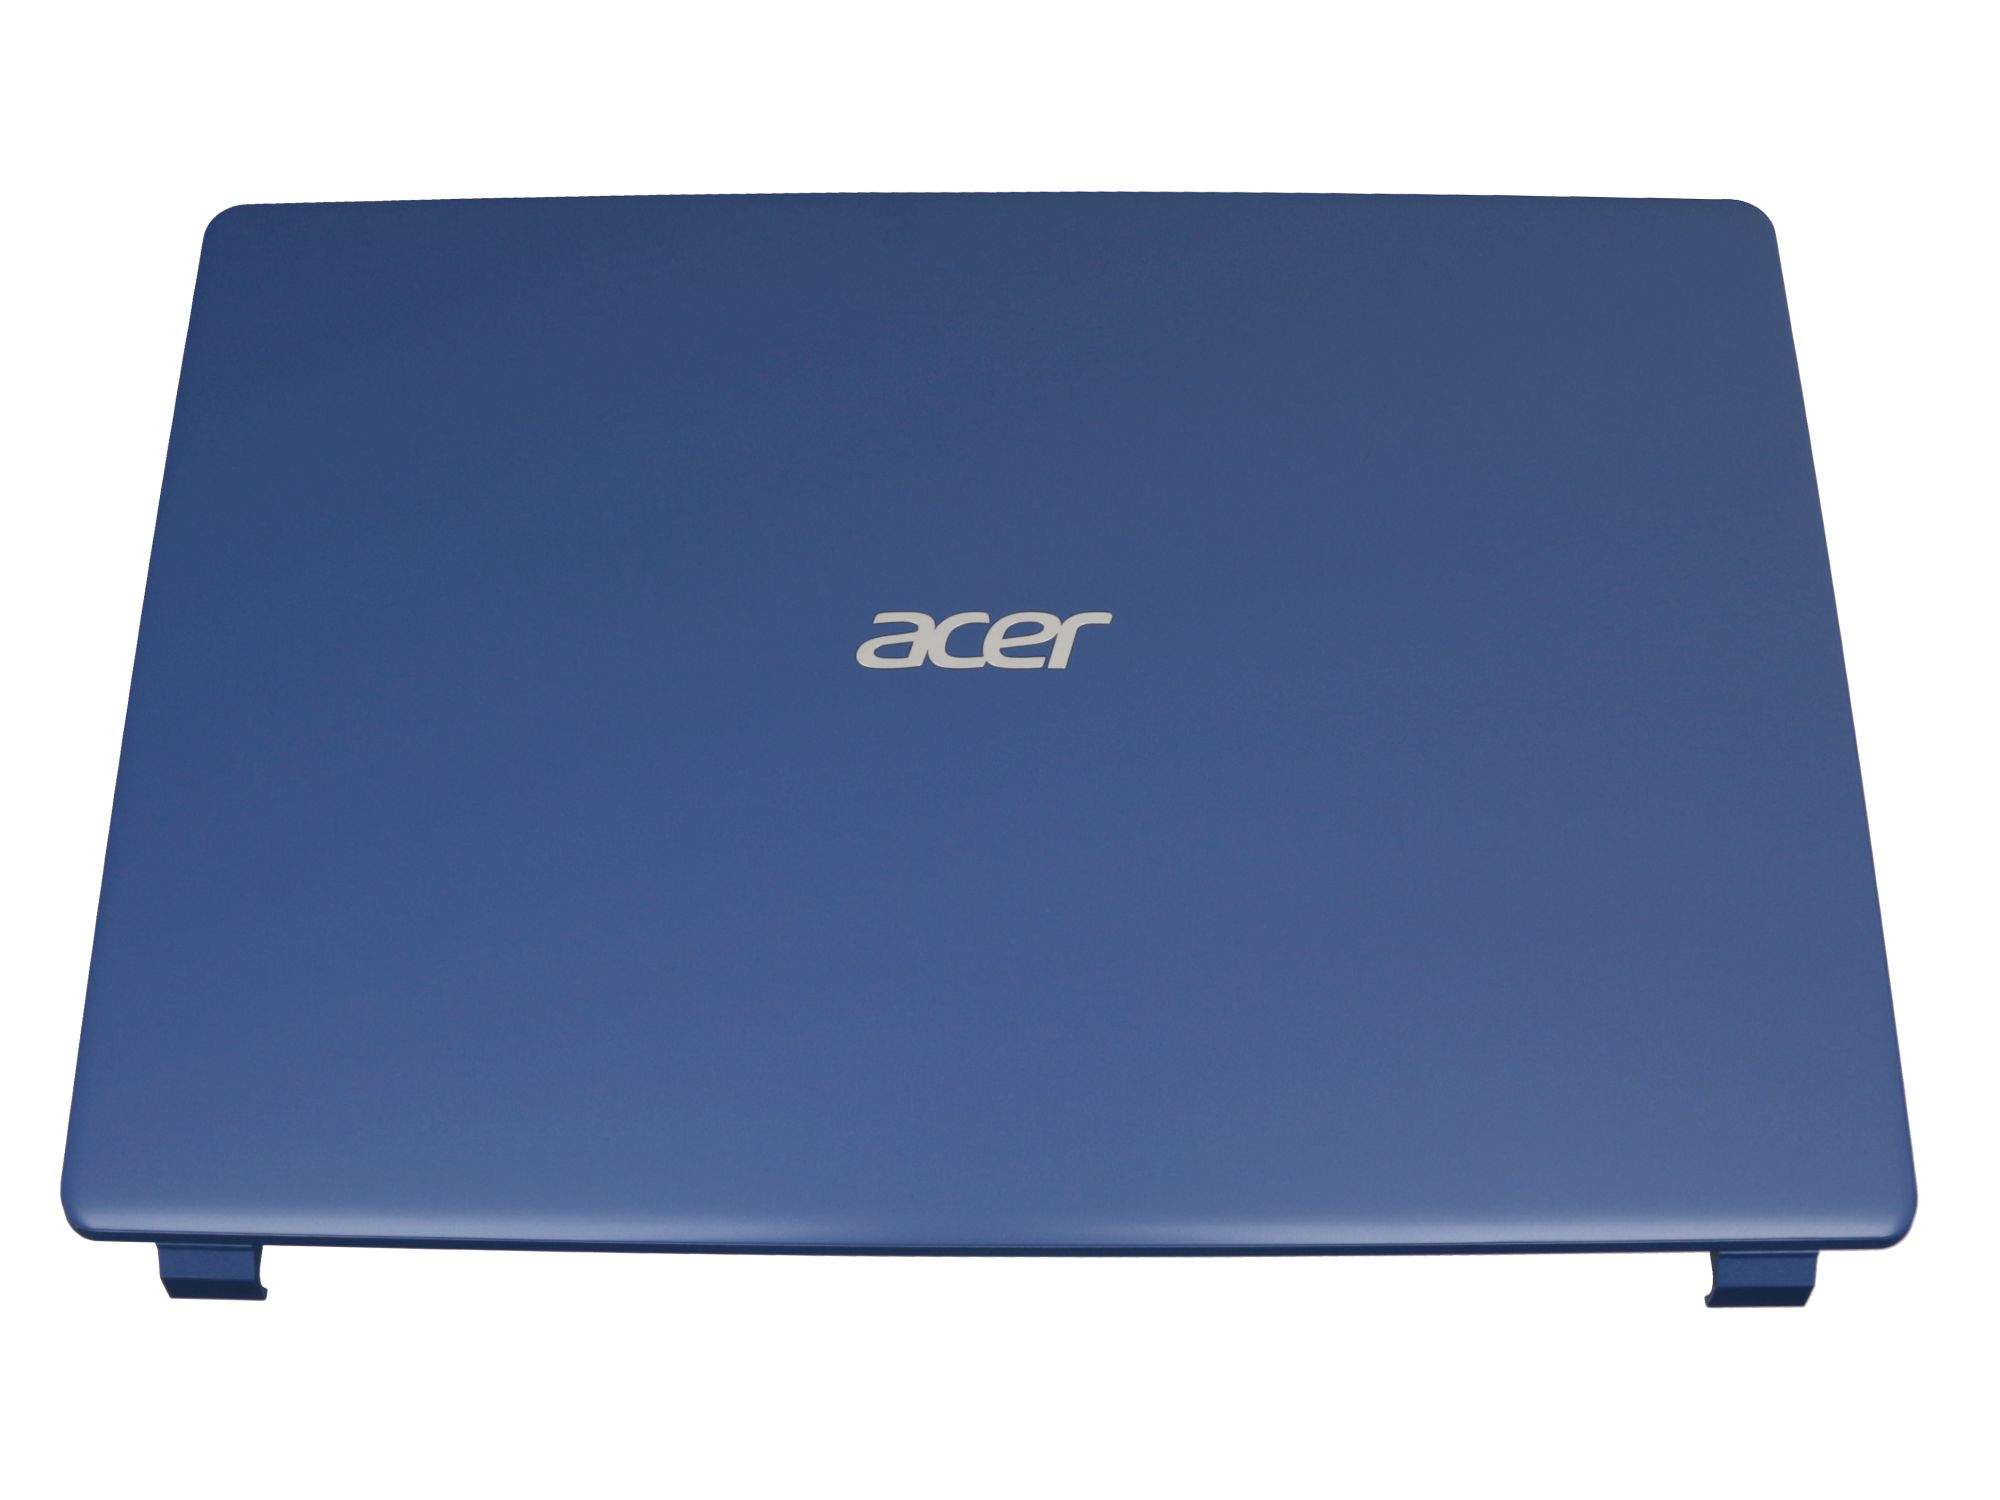 ACER COVER LCD BLUE